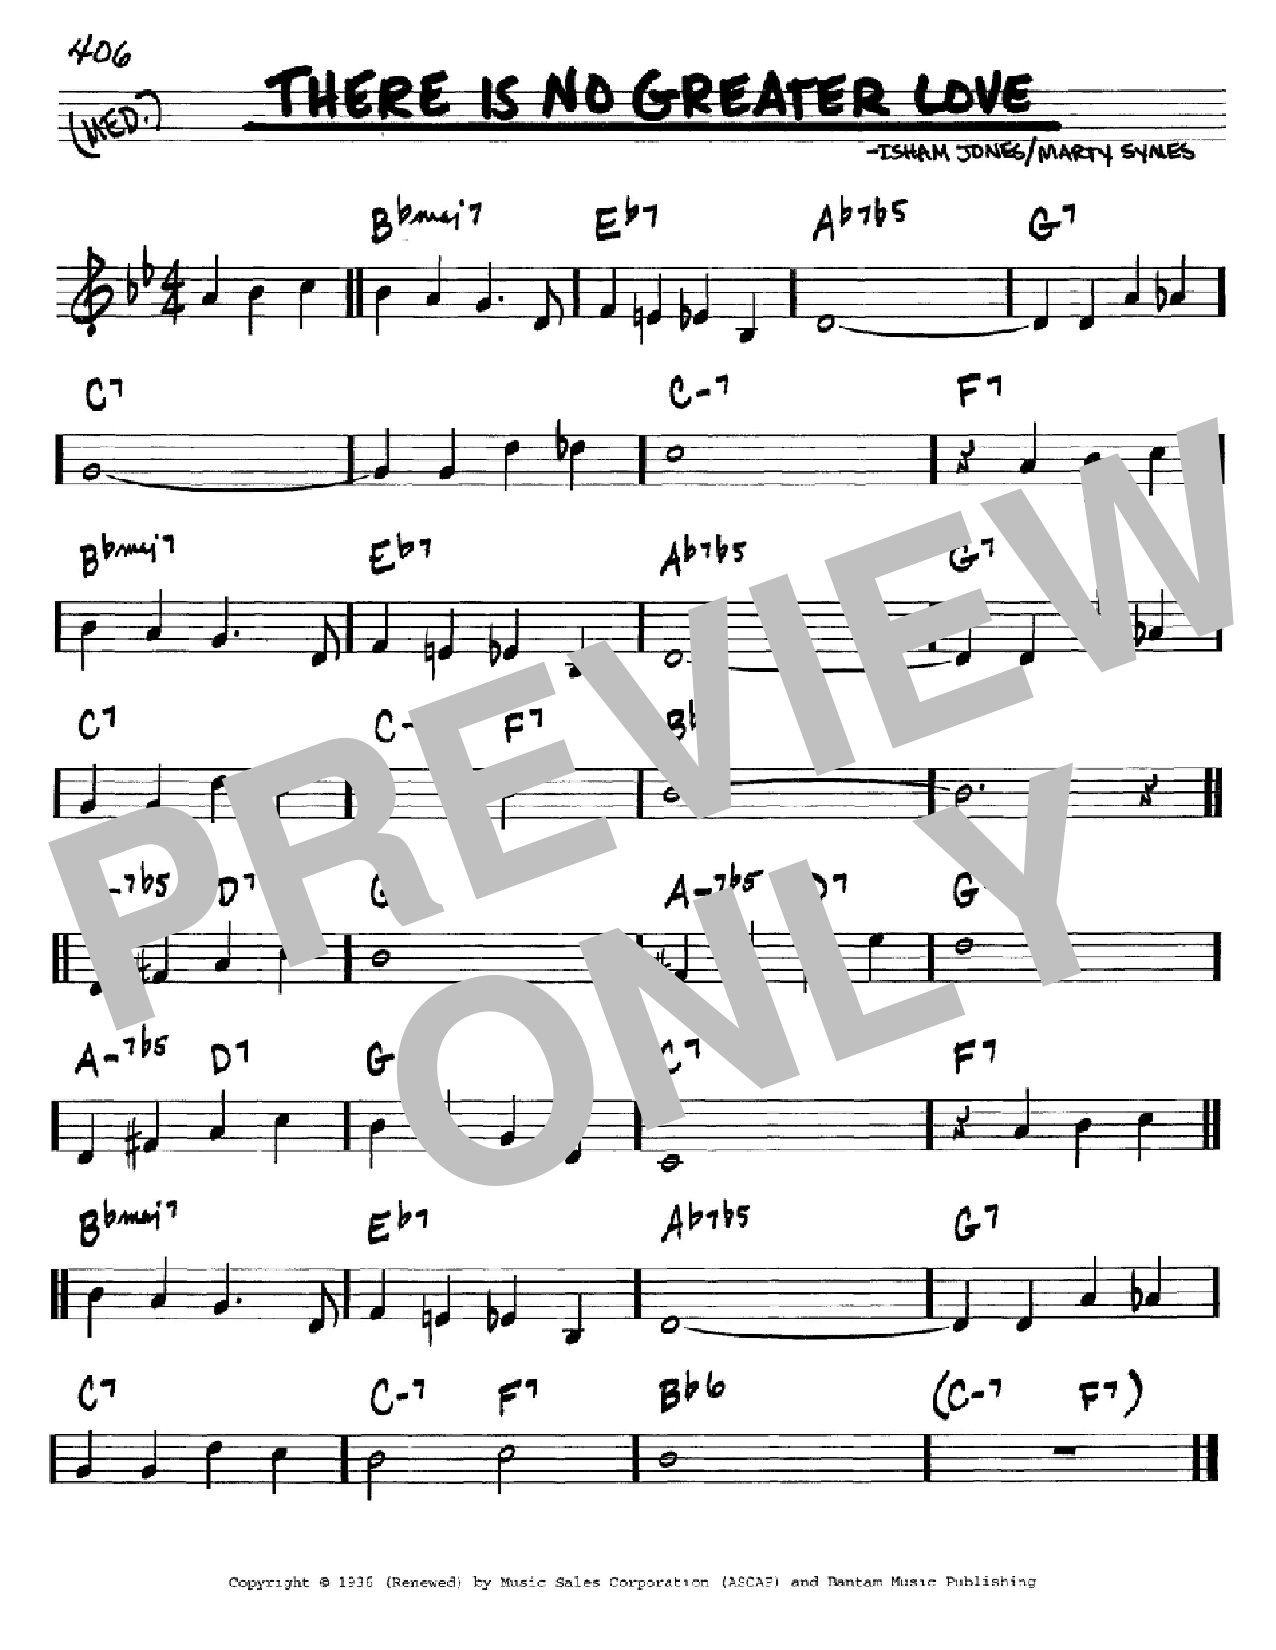 Download Isham Jones There Is No Greater Love Sheet Music